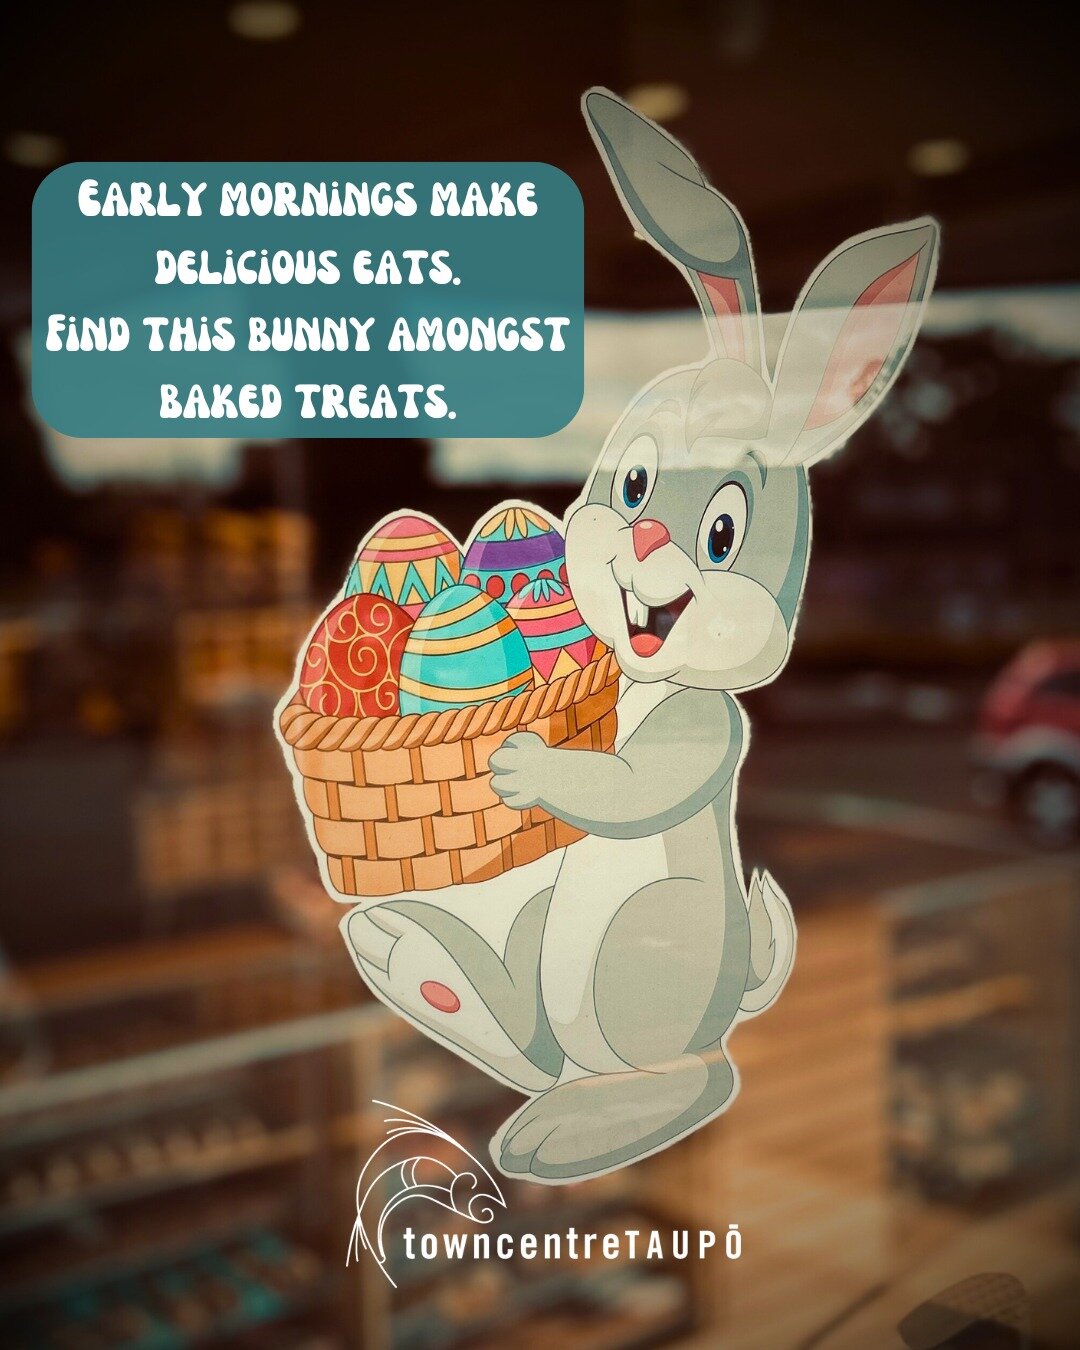 Bunnies, bunnies all over town,
Can you find them all around?
Taupō Town Centre, you&rsquo;ll find their paw.
See at least 10 and be into the draw.

They may be high, they may be low, 
They may be&hellip;right under your nose!
Early mornings make del